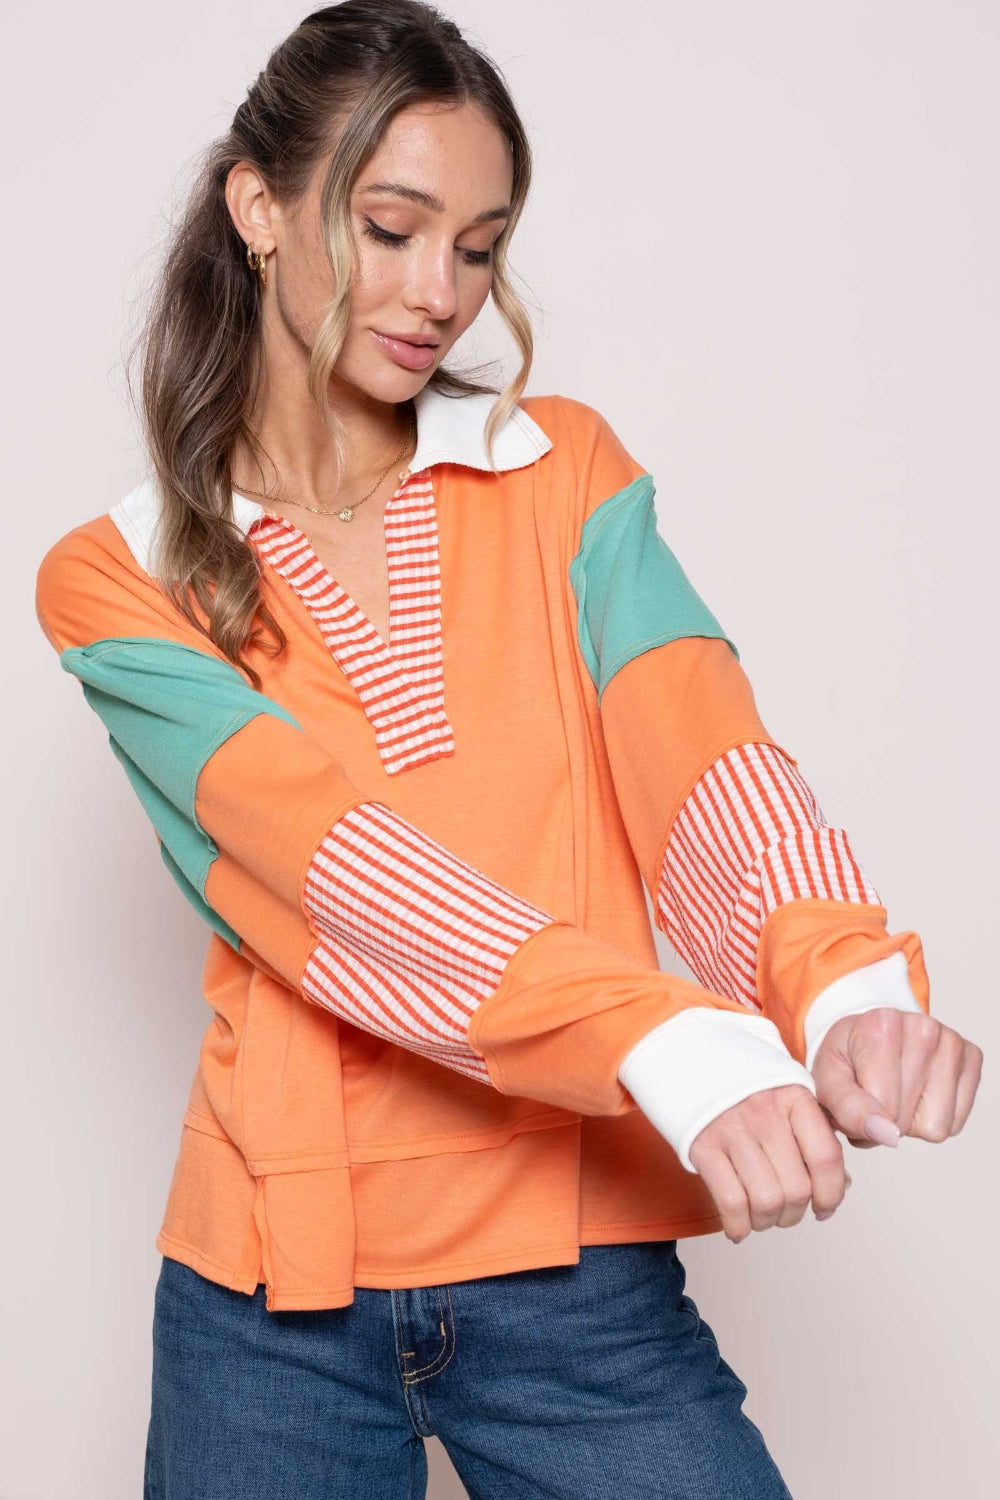 Hazel Blues® |  Hailey & Co Color Block Top with Striped Panel